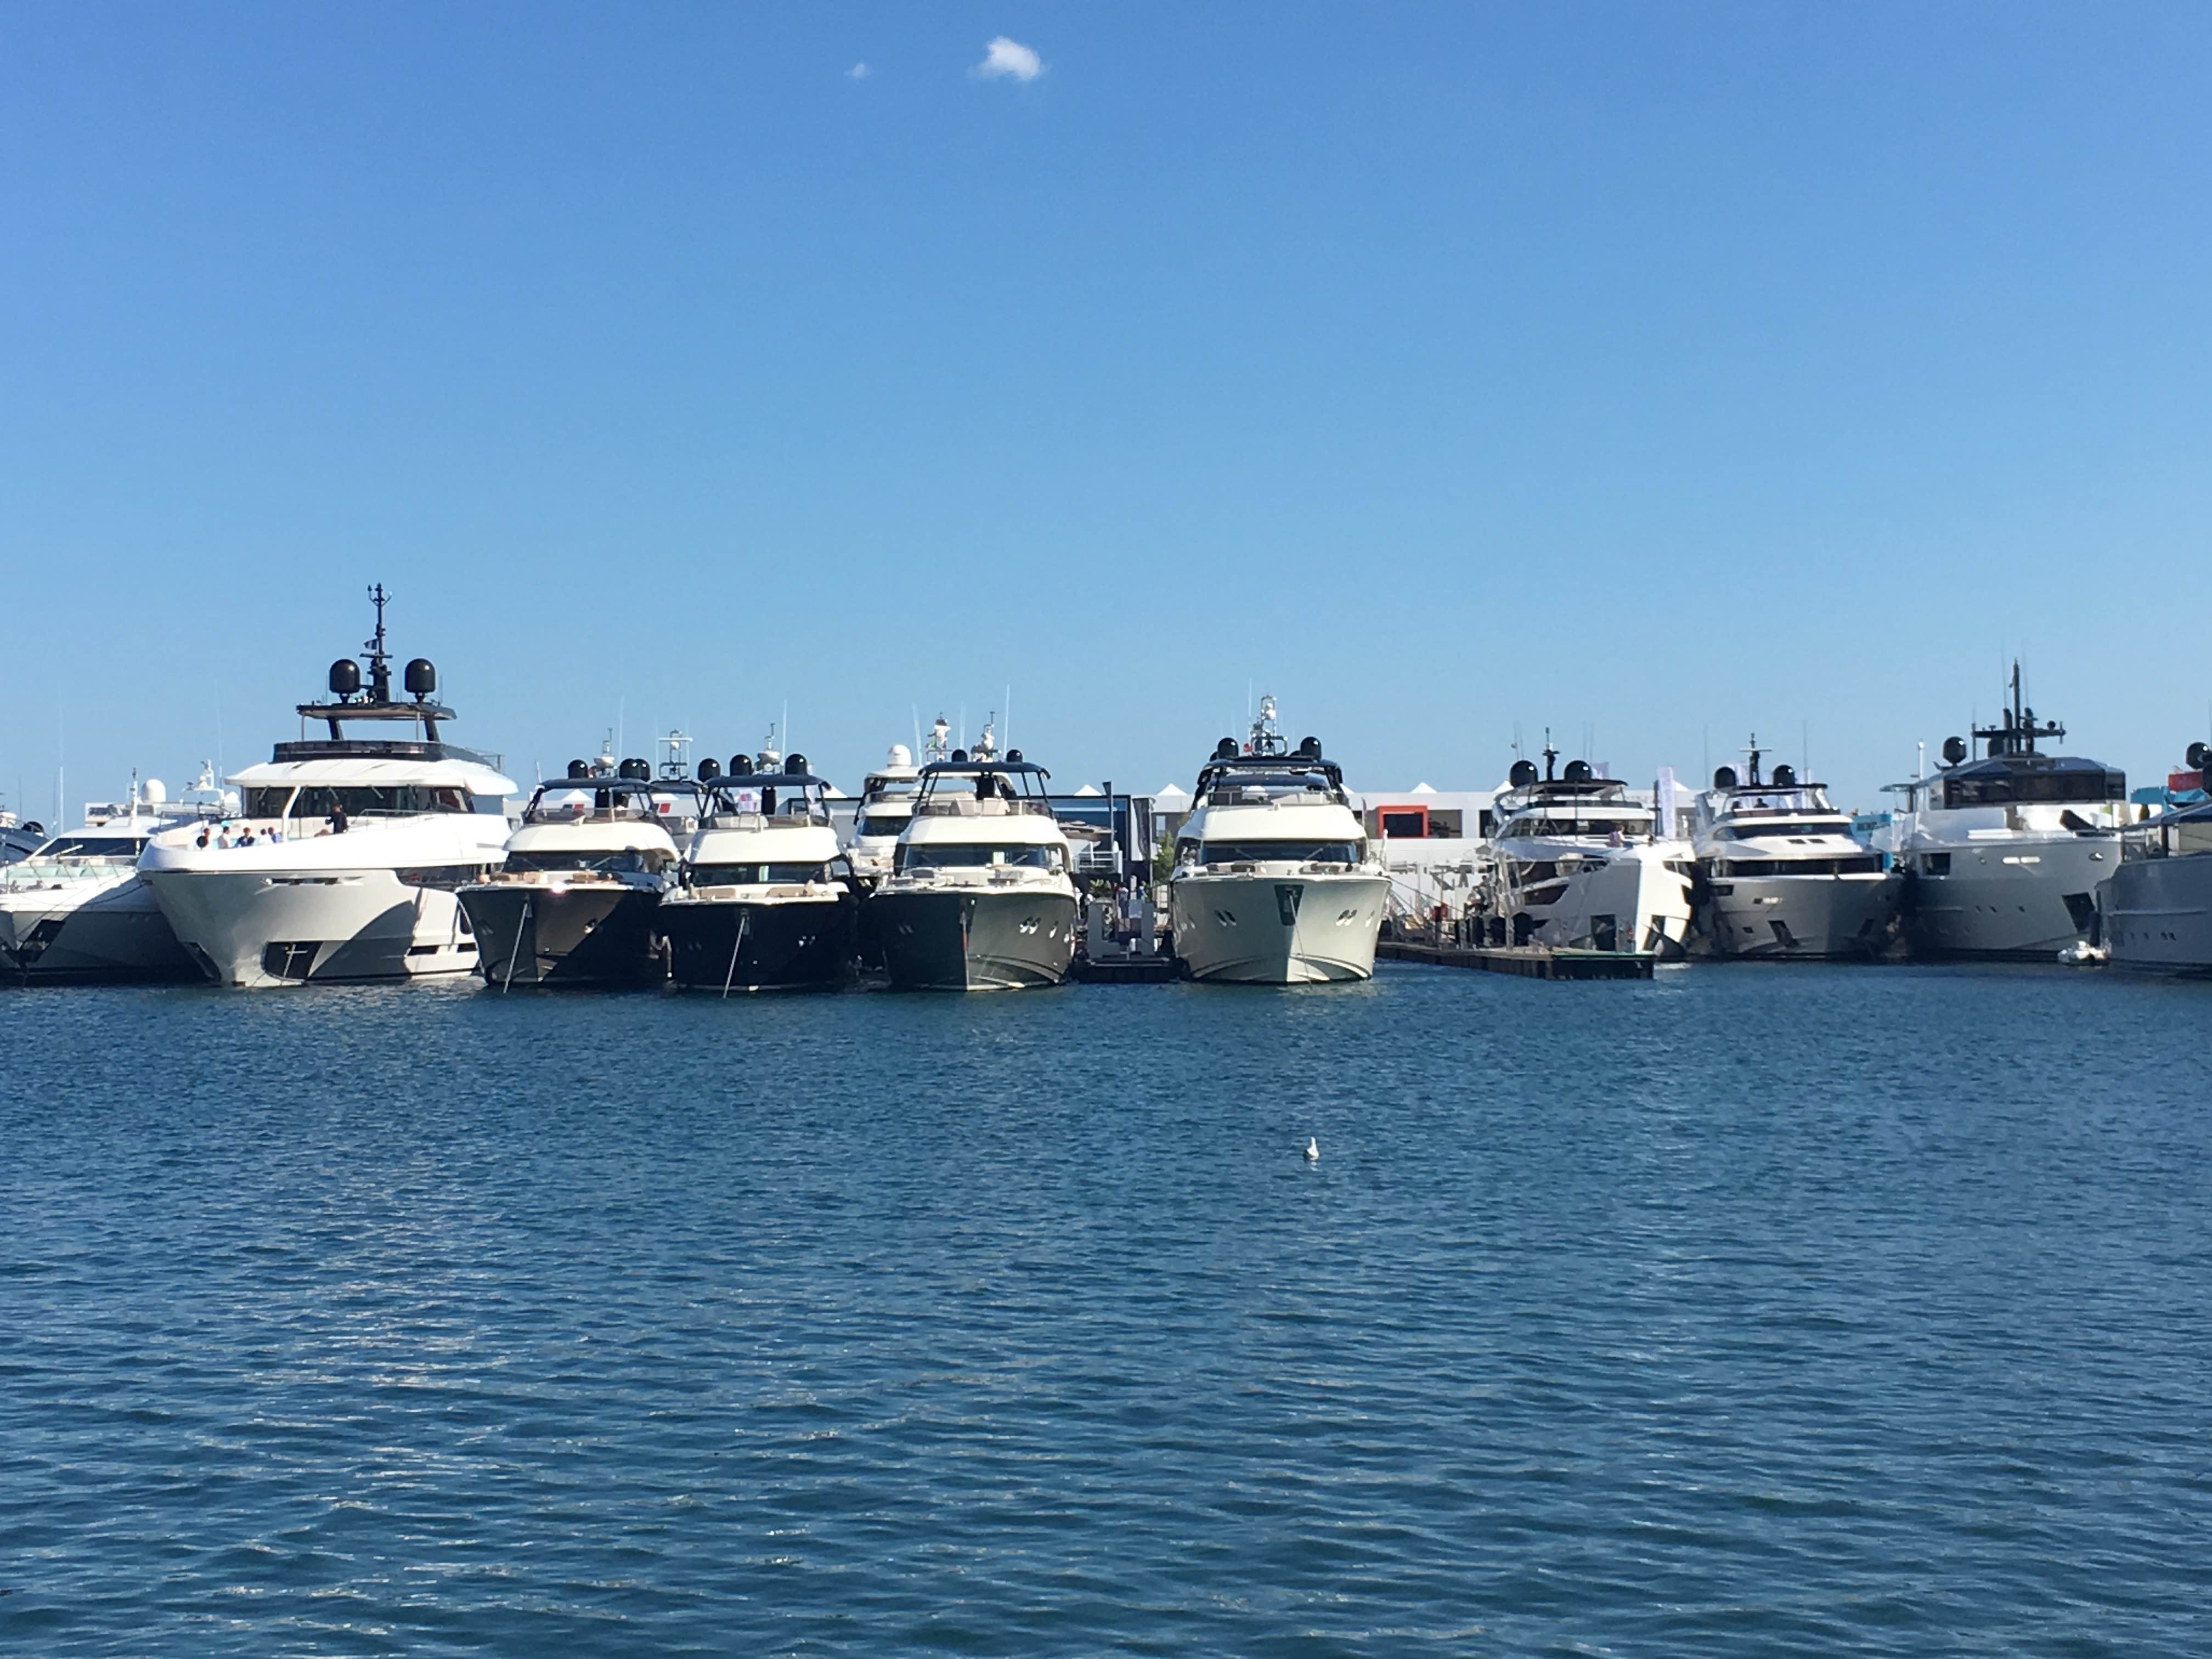 Cannes Yachting Festival... a first impression